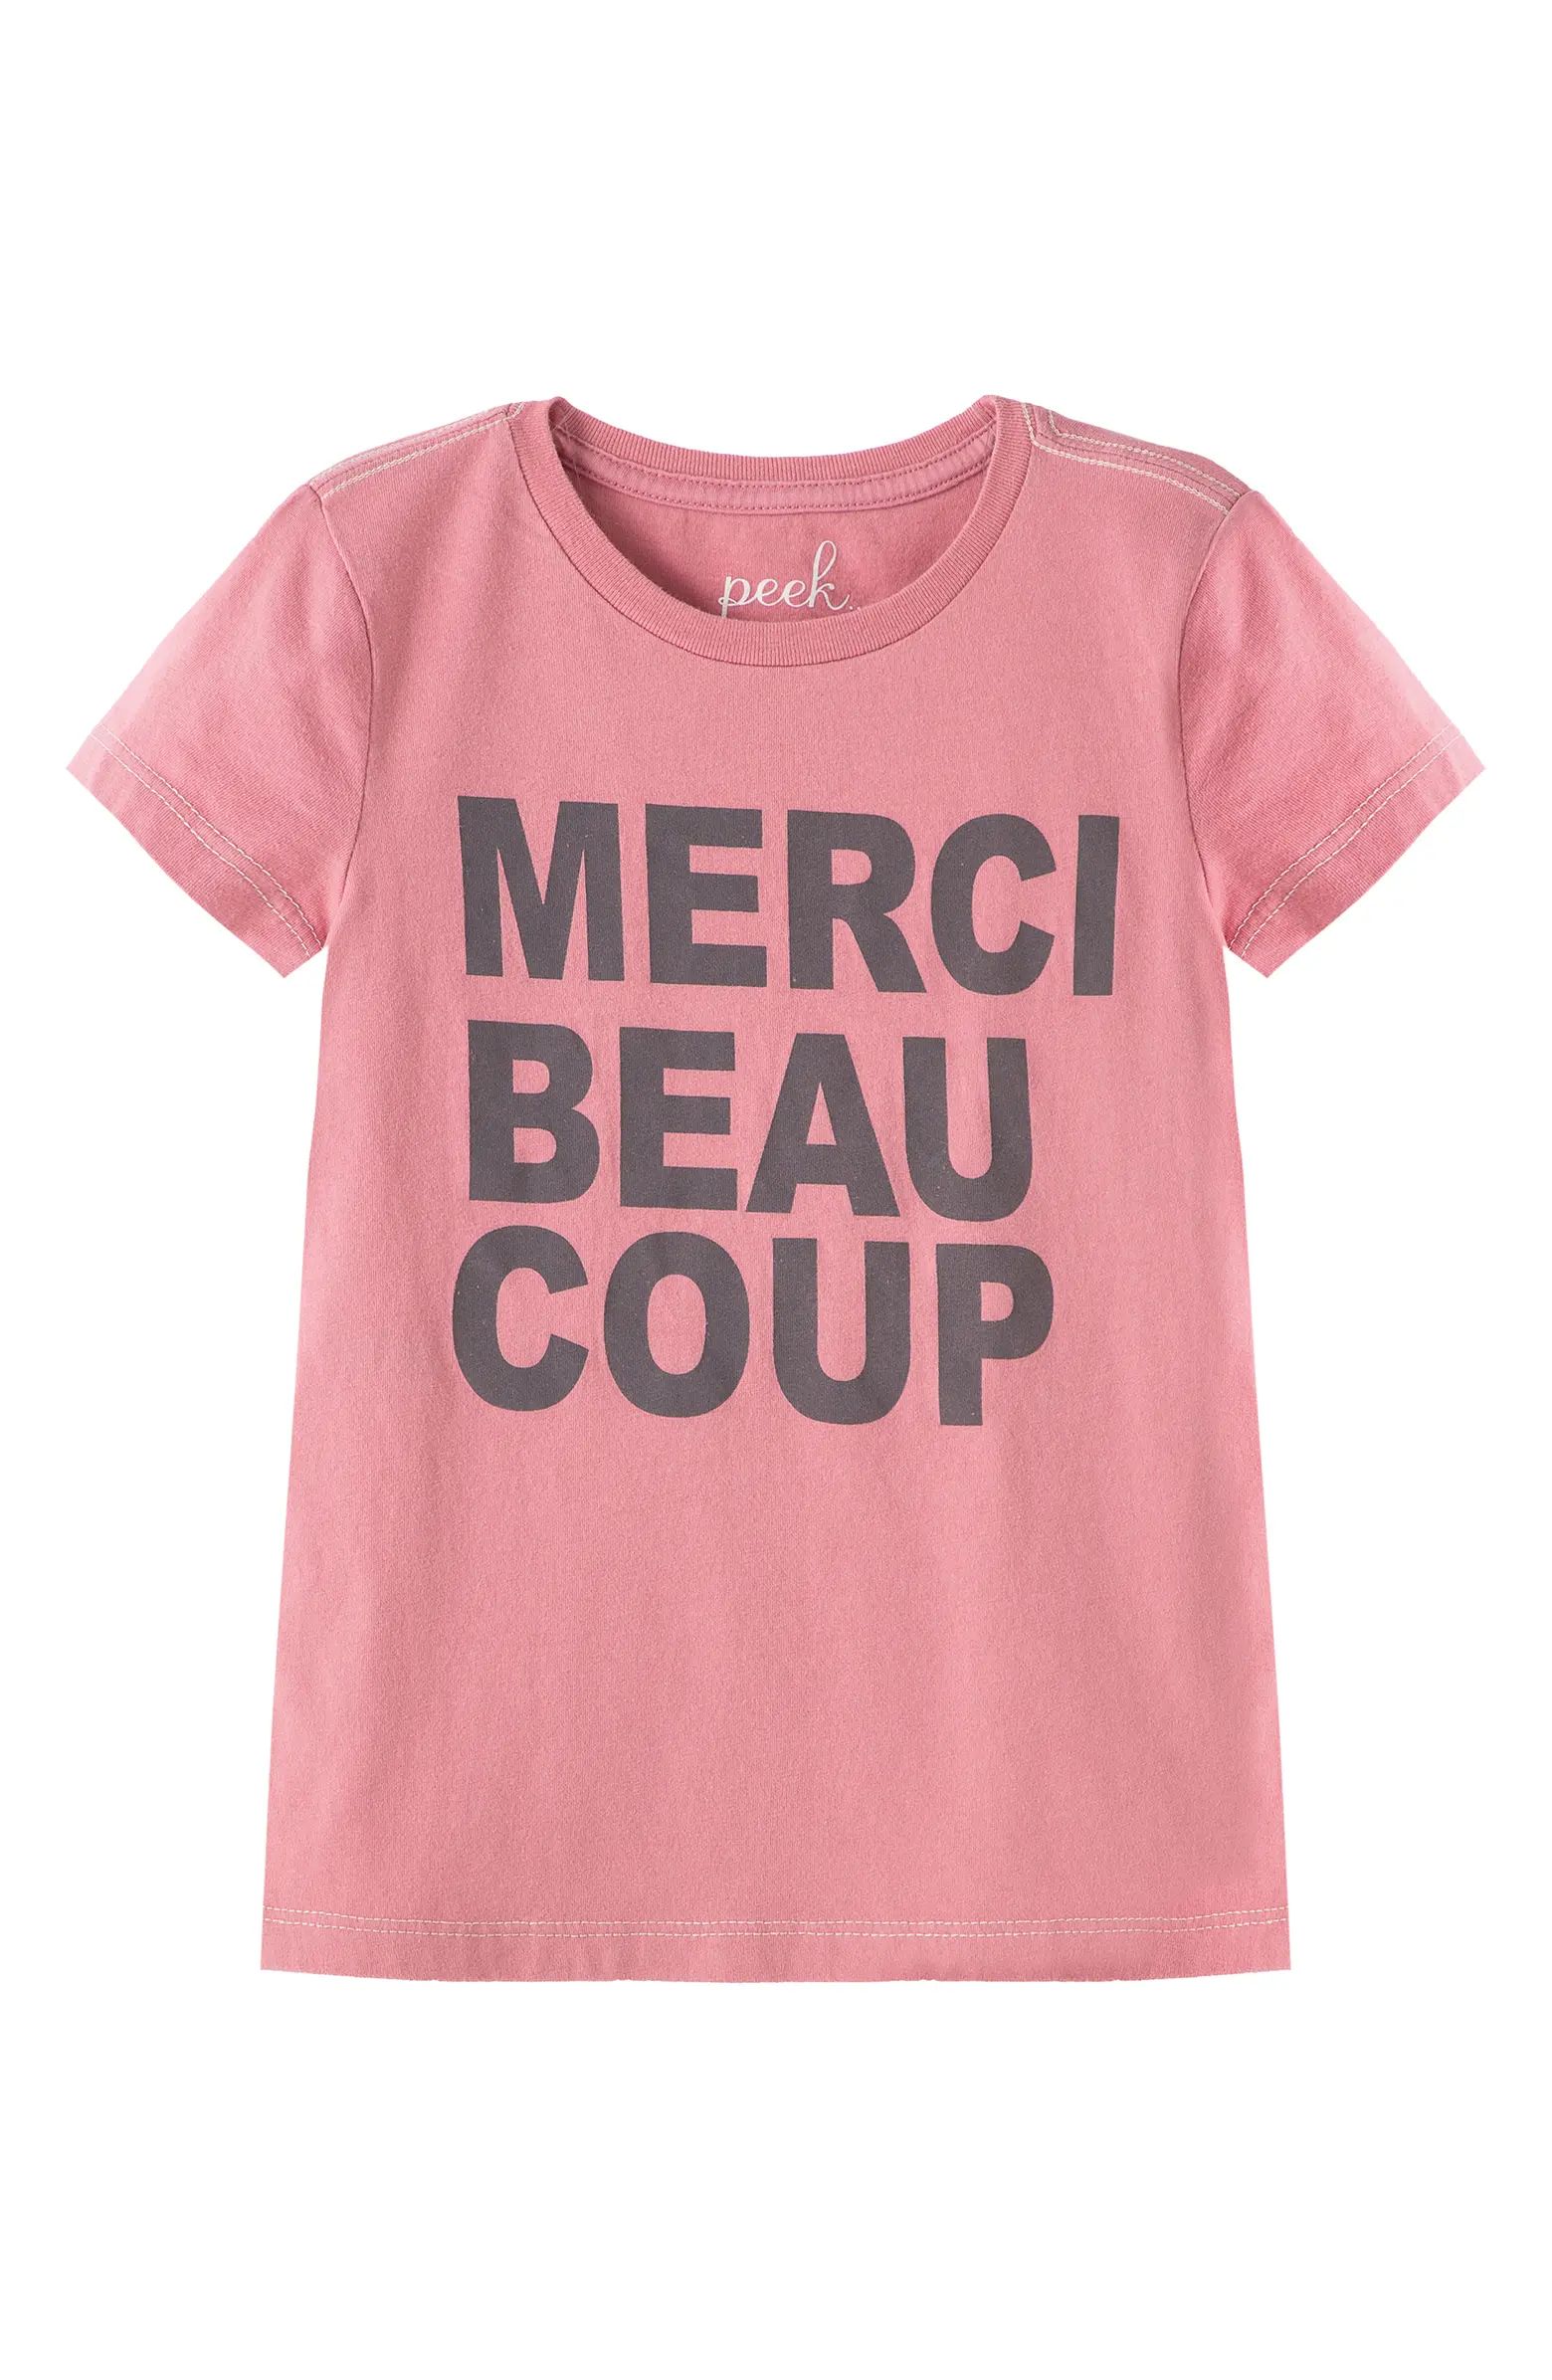 Merci Beau Coup Graphic Tee | Nordstrom